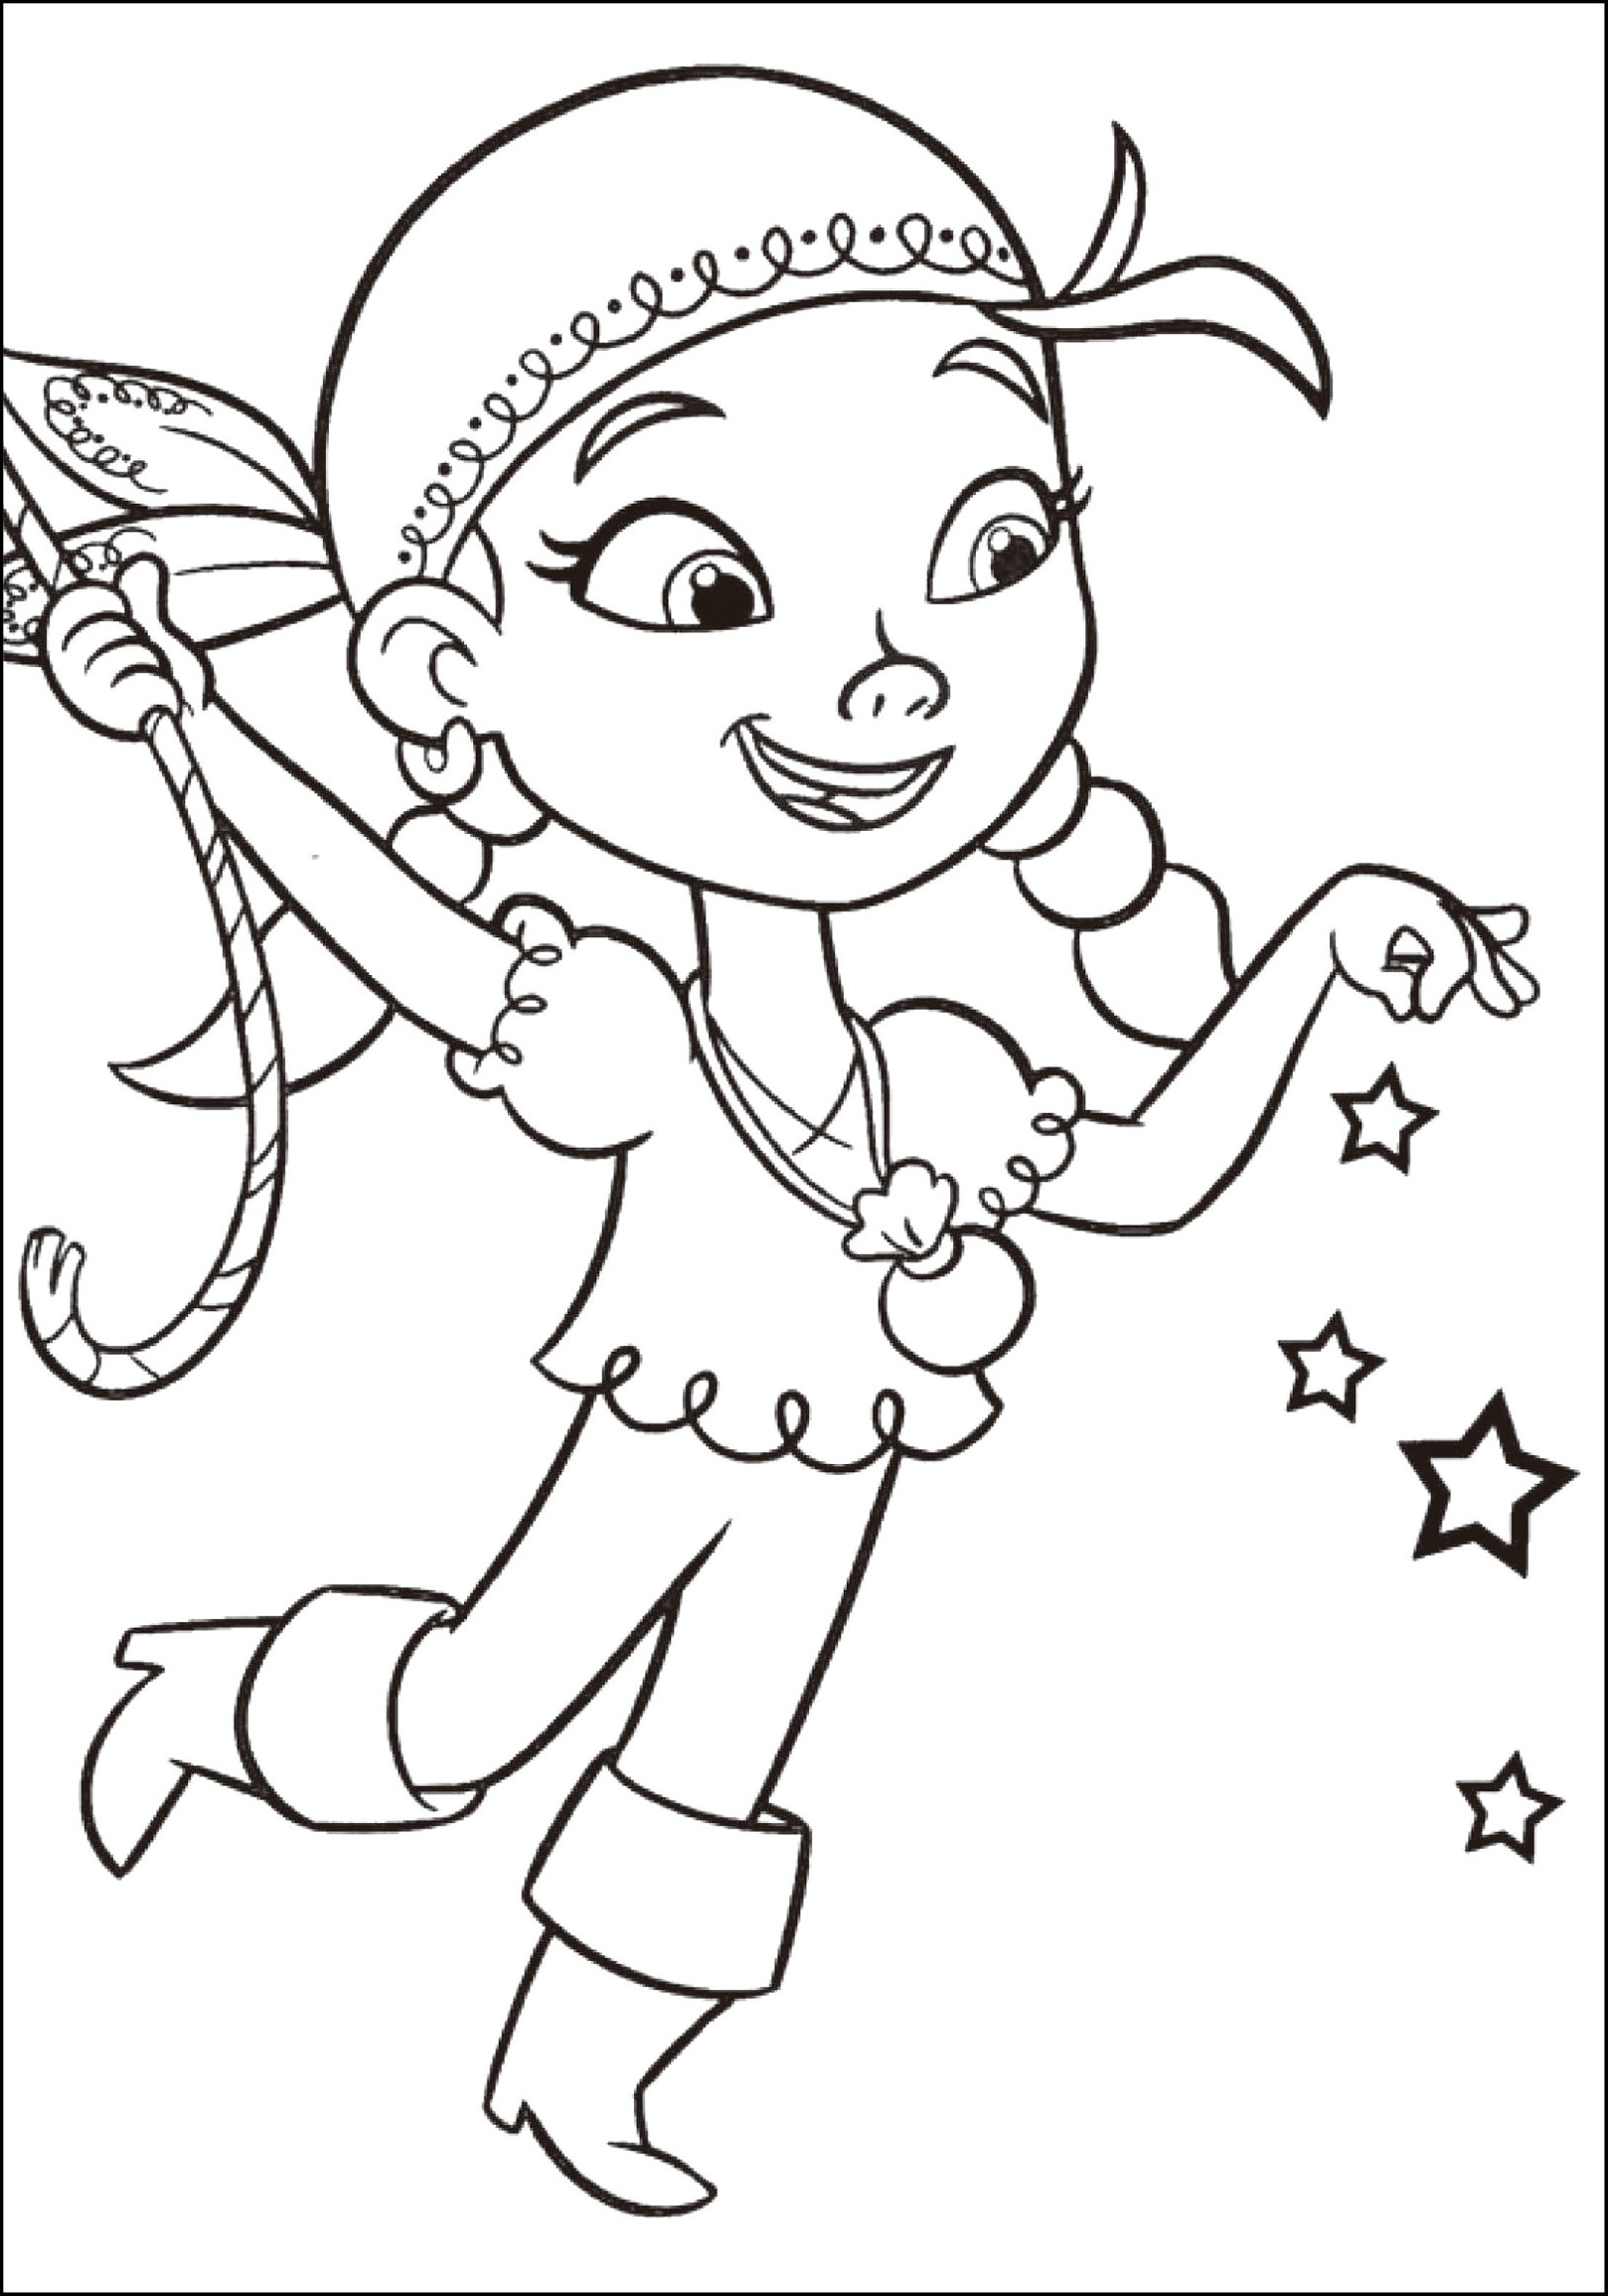 Coloring page Jake and the Never Land Pirates Izzy